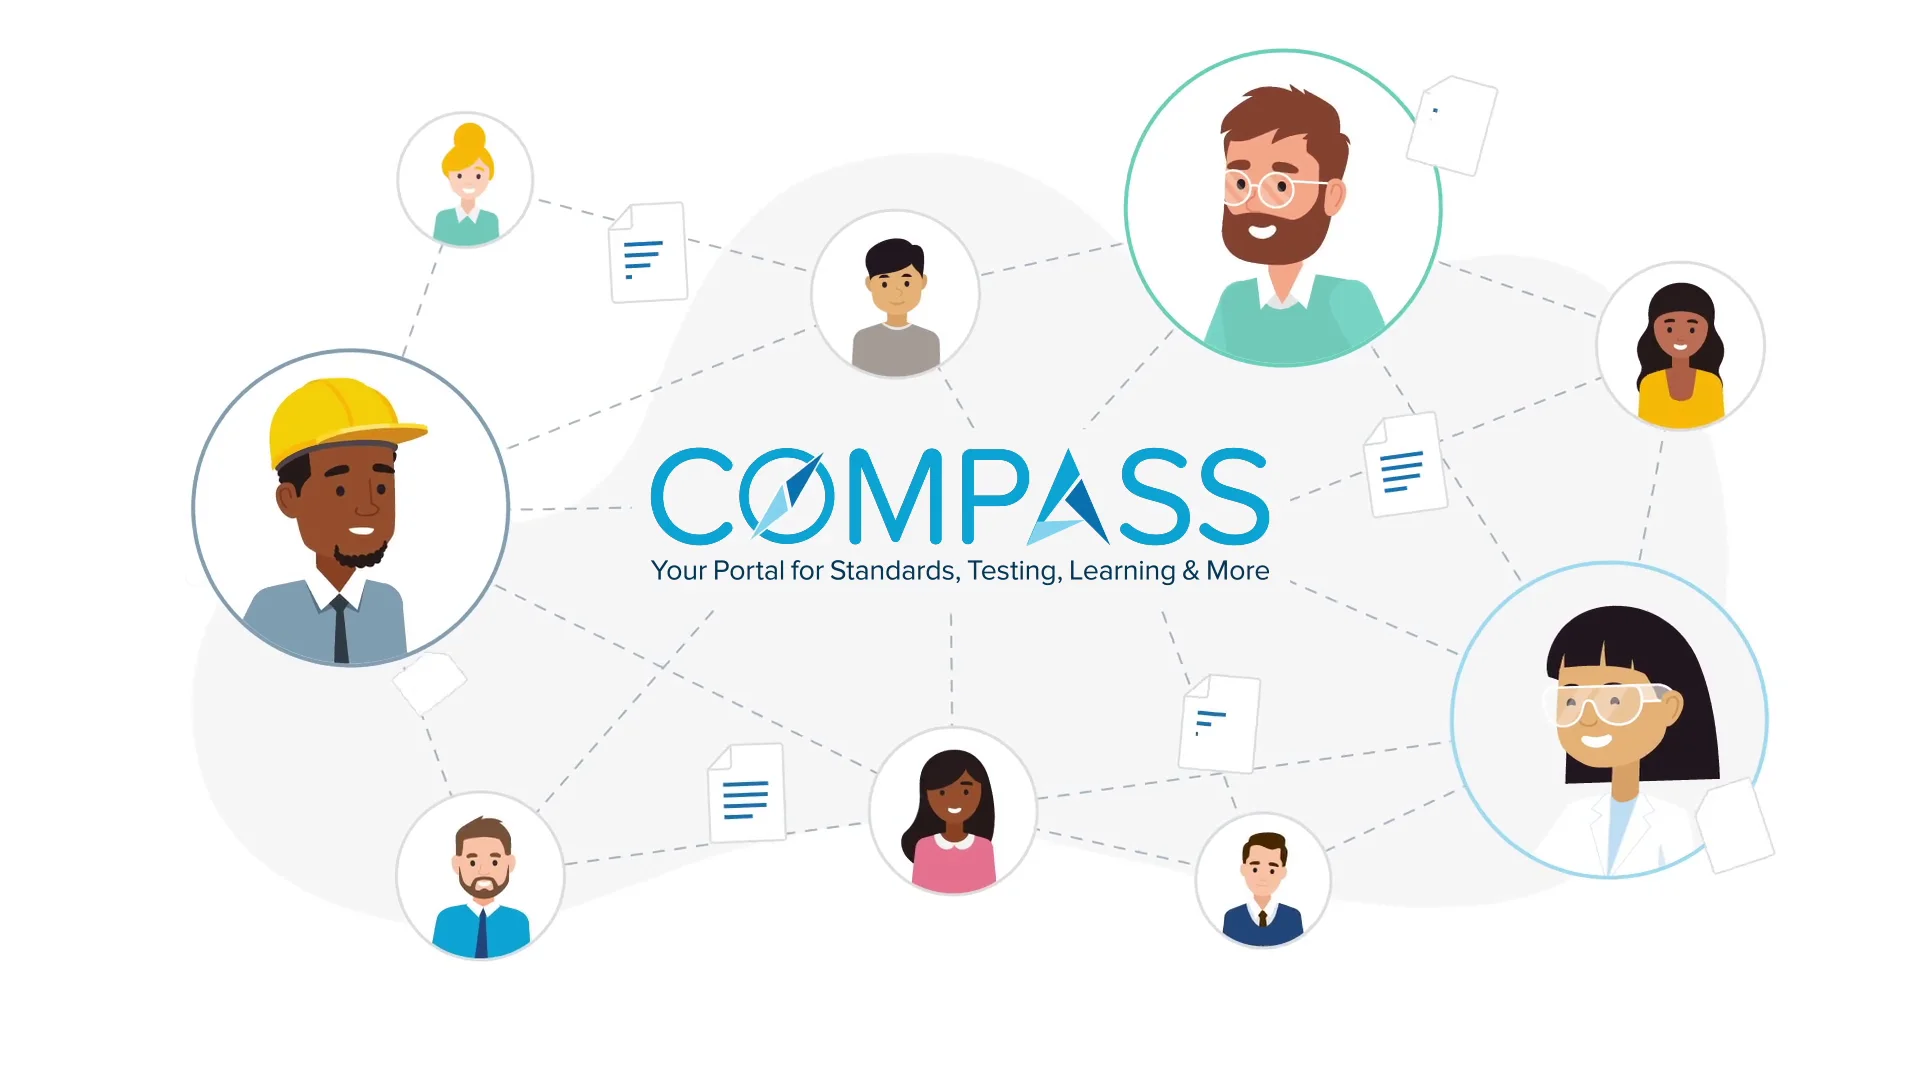 why online compass is popular?